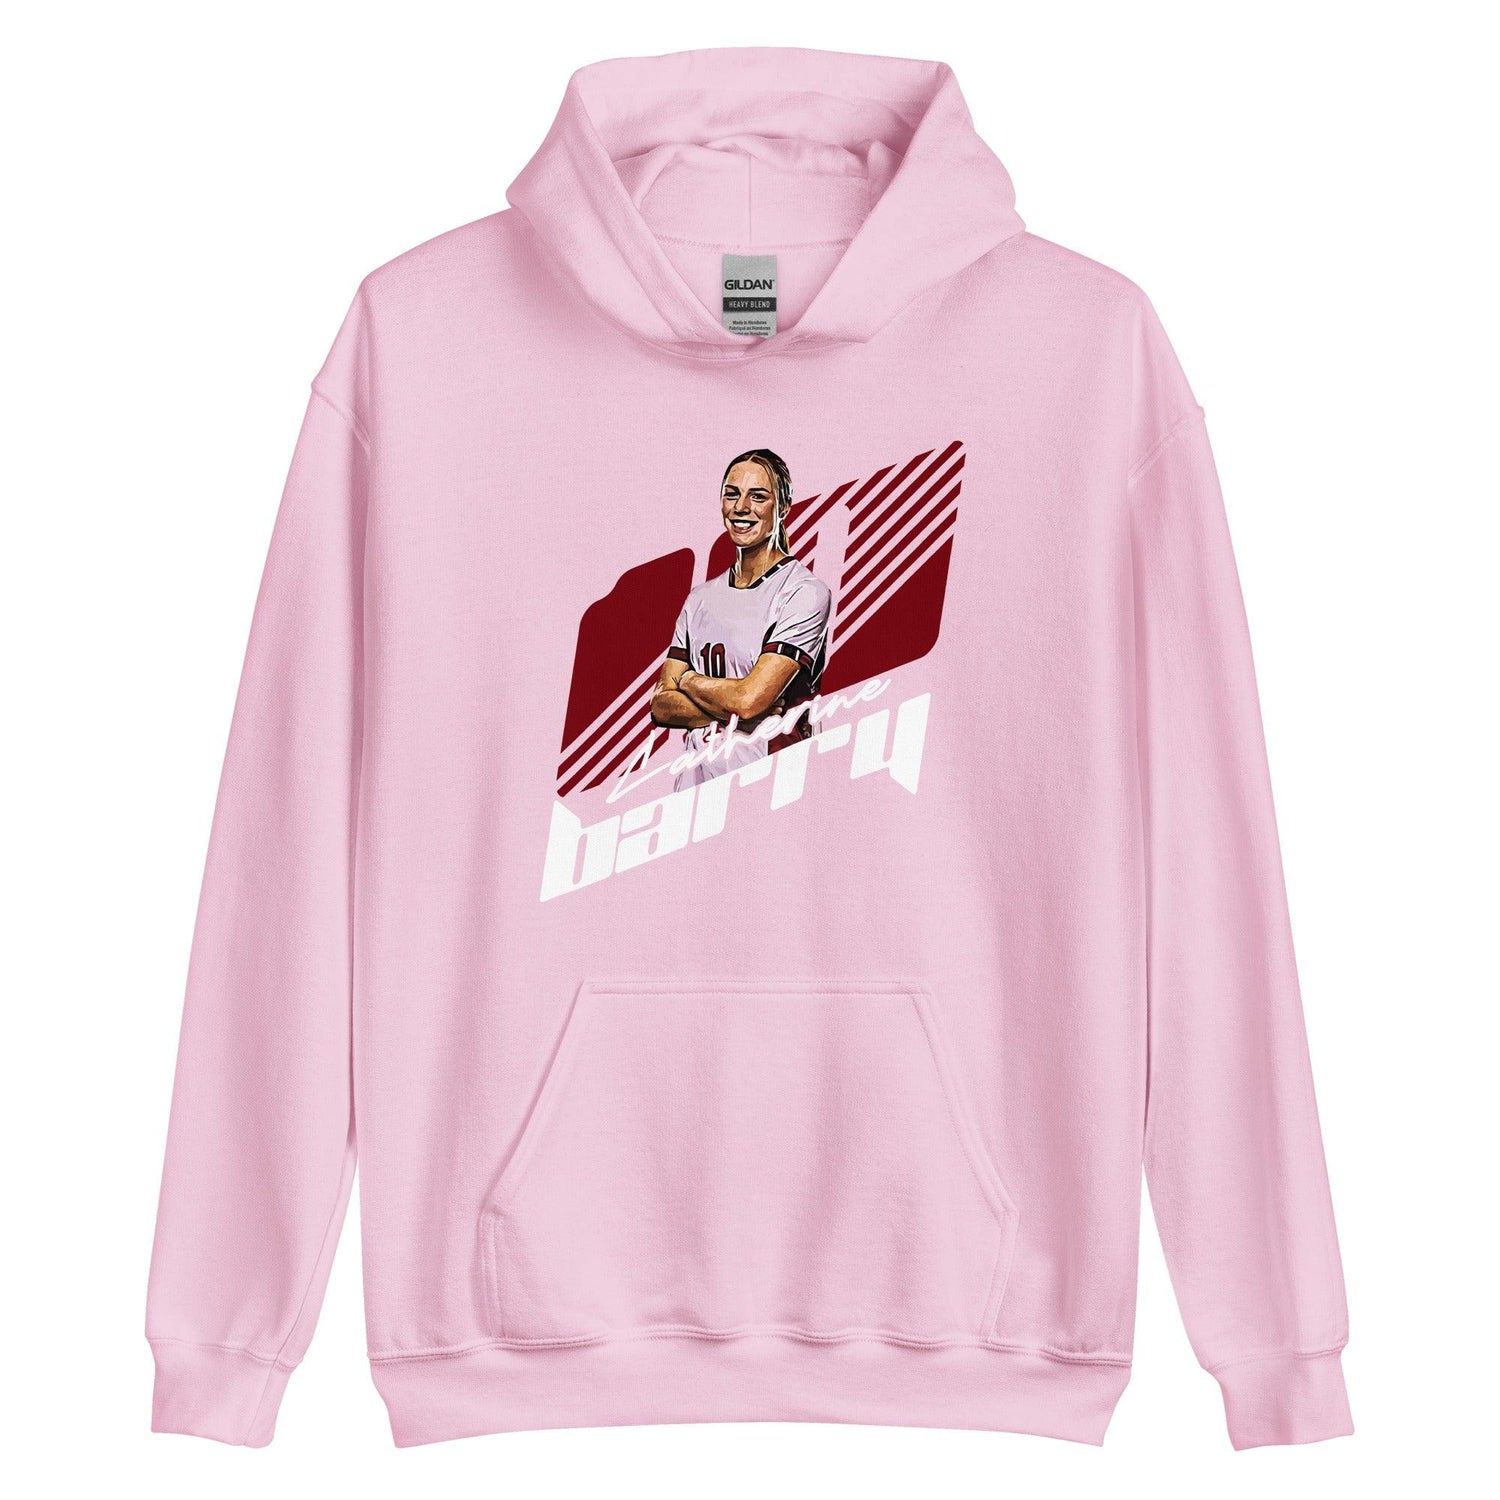 Catherine Barry "Gameday" Hoodie - Fan Arch